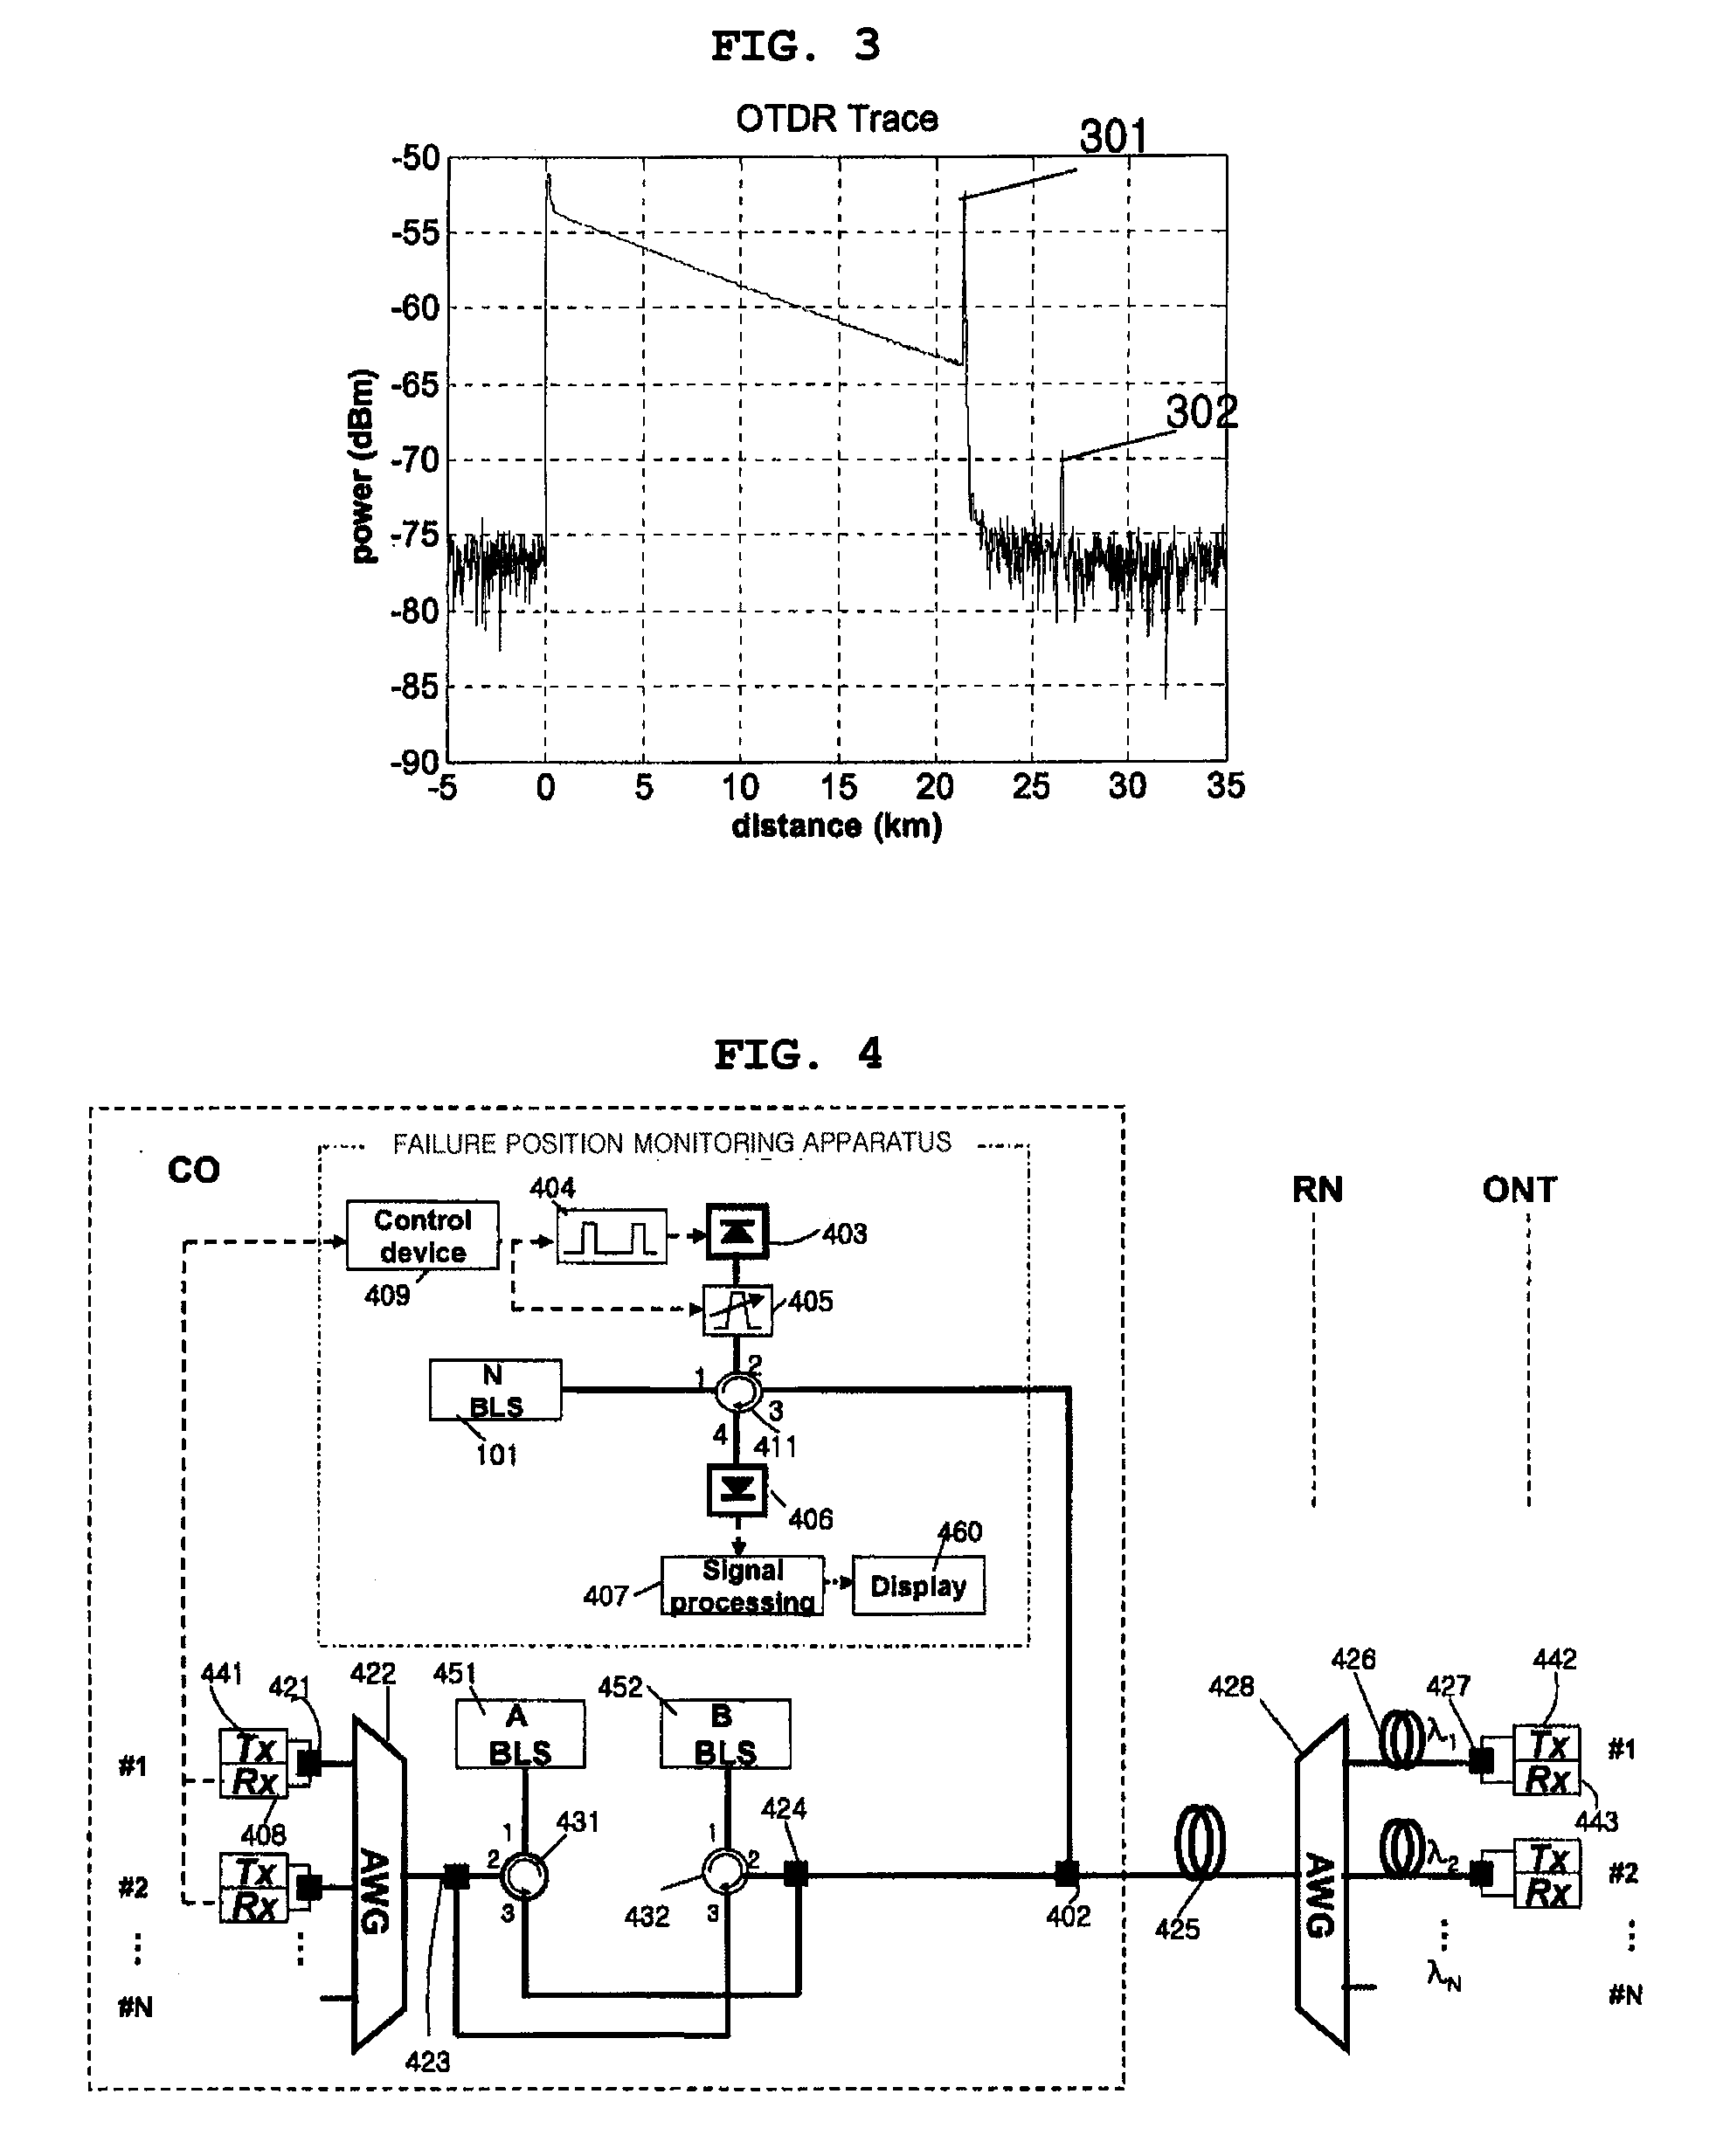 Apparatus for Monitoring Failure Positions in Wavelength Division Multiplexing-Passive Optical Networks and Wavelength Division Multiplexing-Passive Optical Network Systems Having the Apparatus